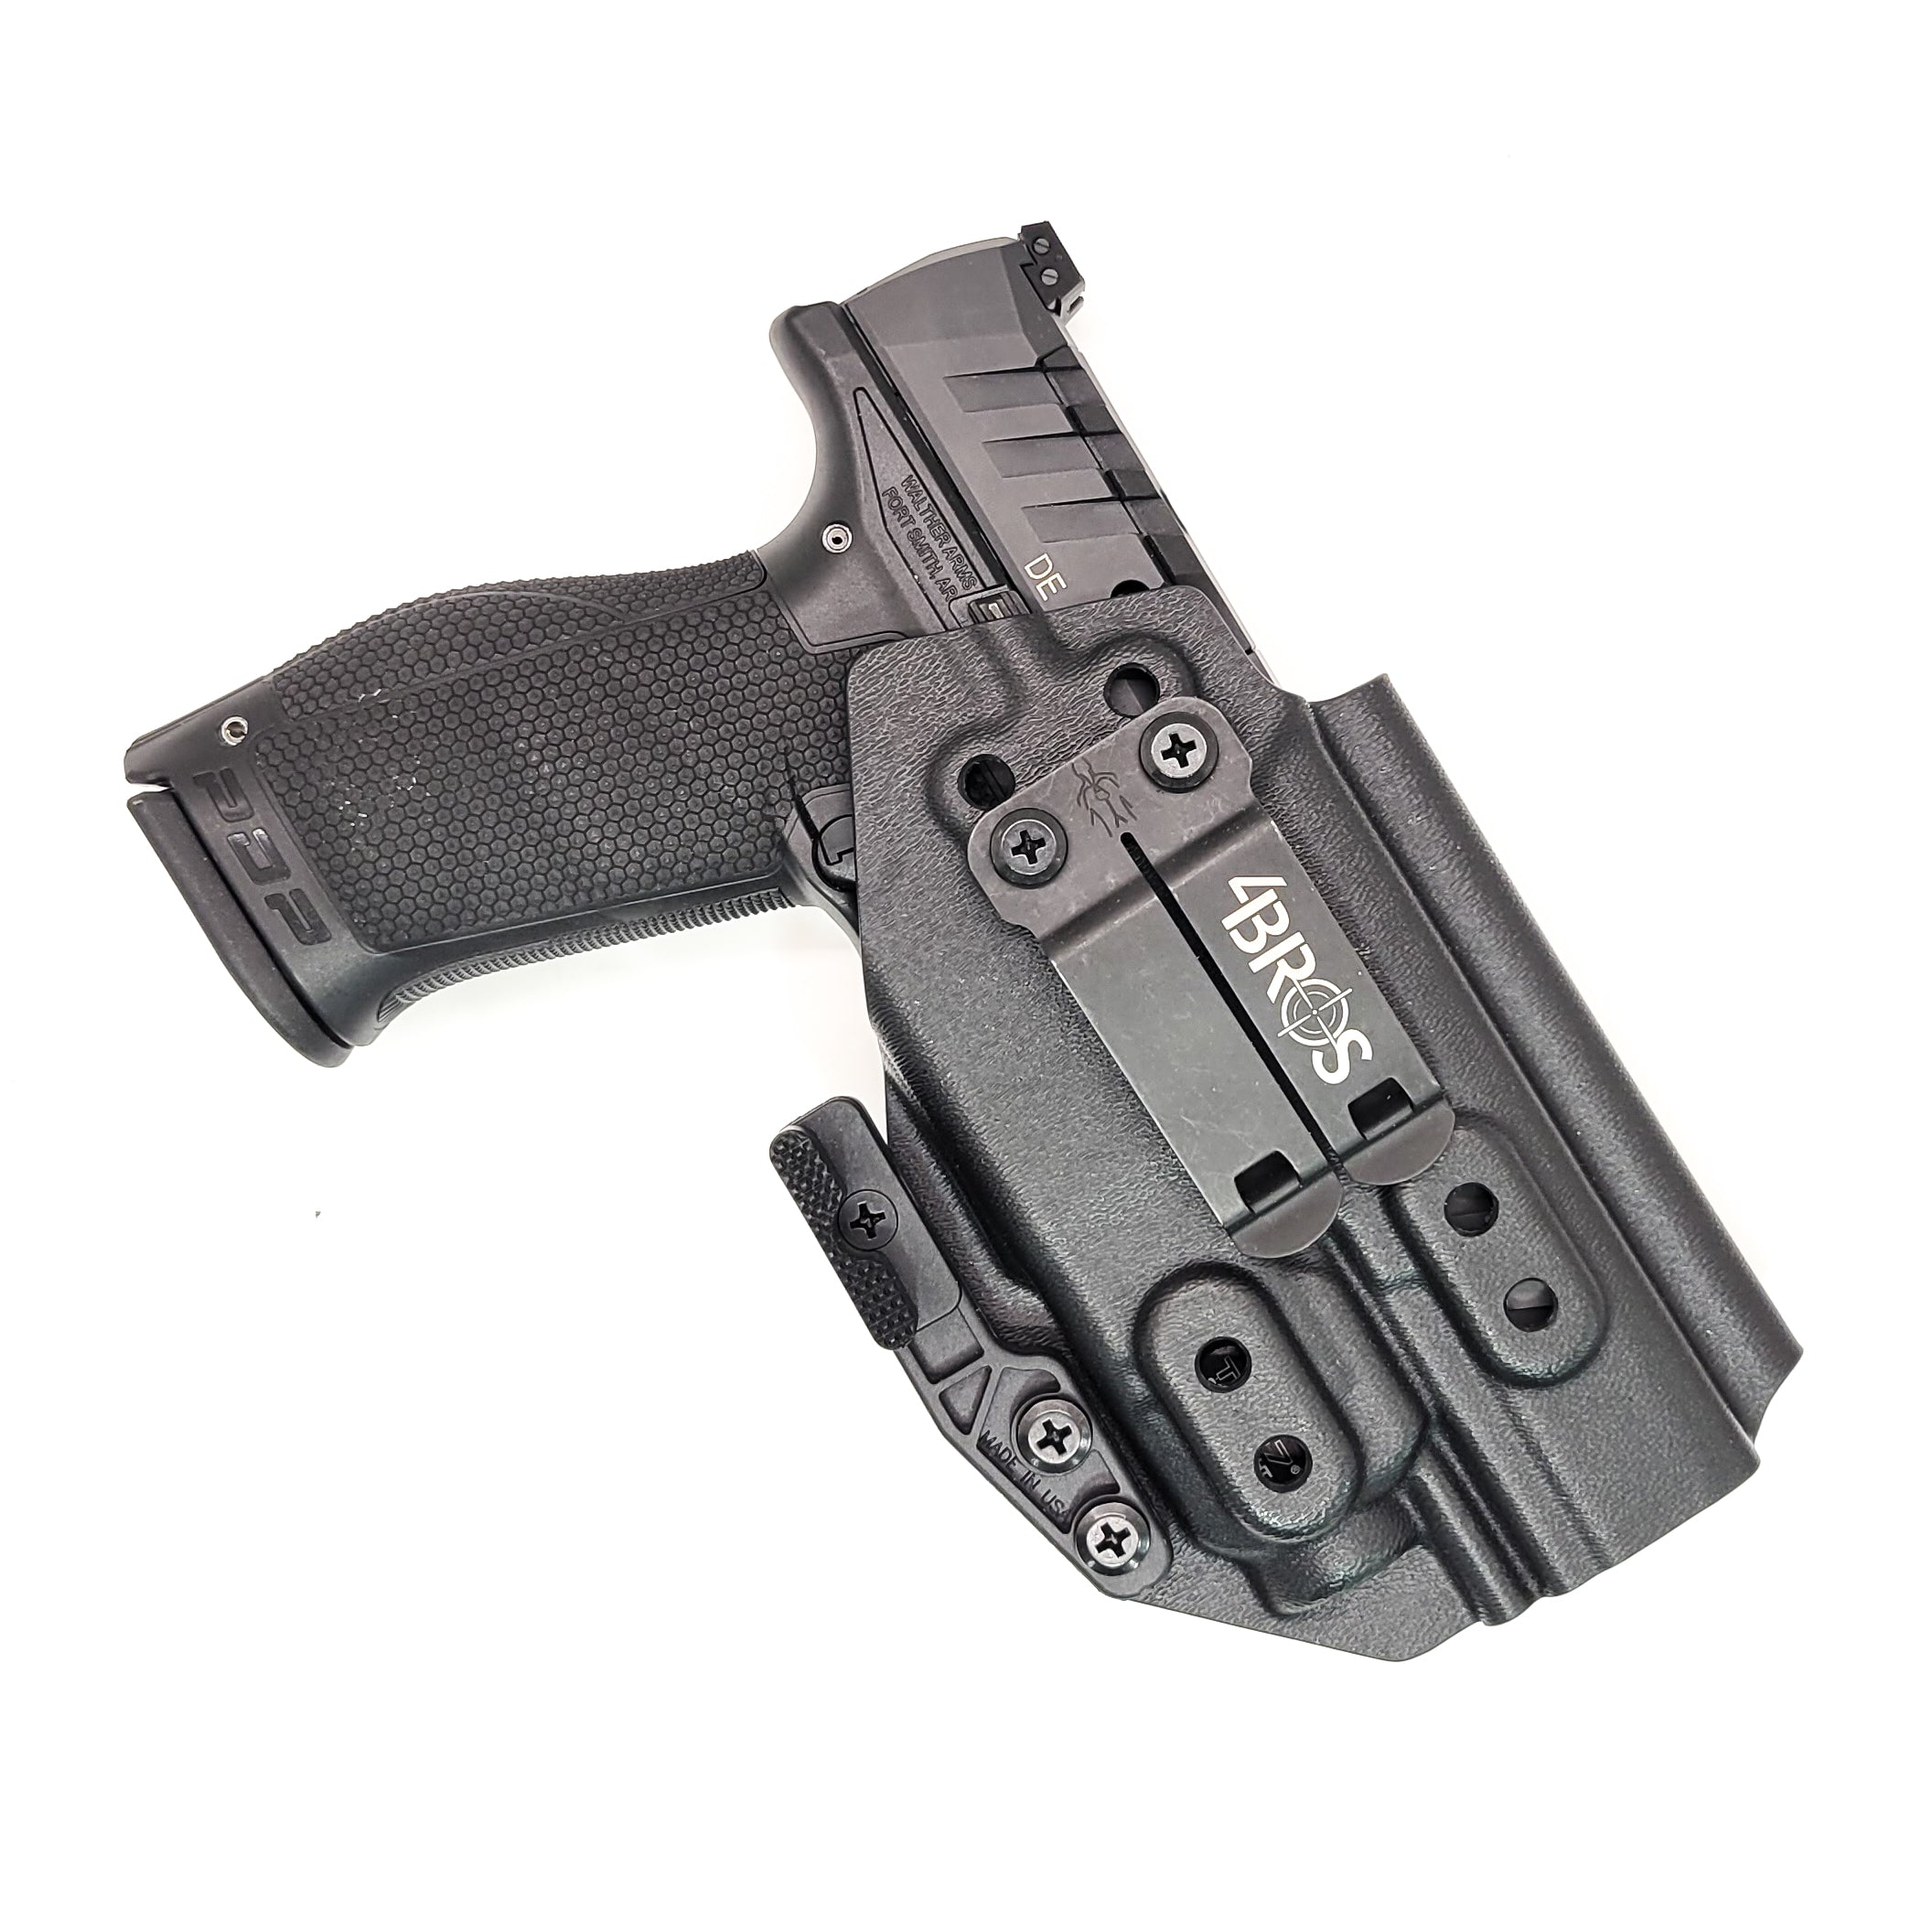 For the best concealed carry Inside Waistband IWB AIWB Holster designed to fit the Walther PDP Pro SD Compact 4.6" pistol with a 4" slide and 4.6" threaded barrel and Streamlight TLR-7A or TLR-7 mounted on the firearm, shop Four Brothers Holsters. Cut for red dot sight, full sweat guard, adjustable retention & open muzzle.  